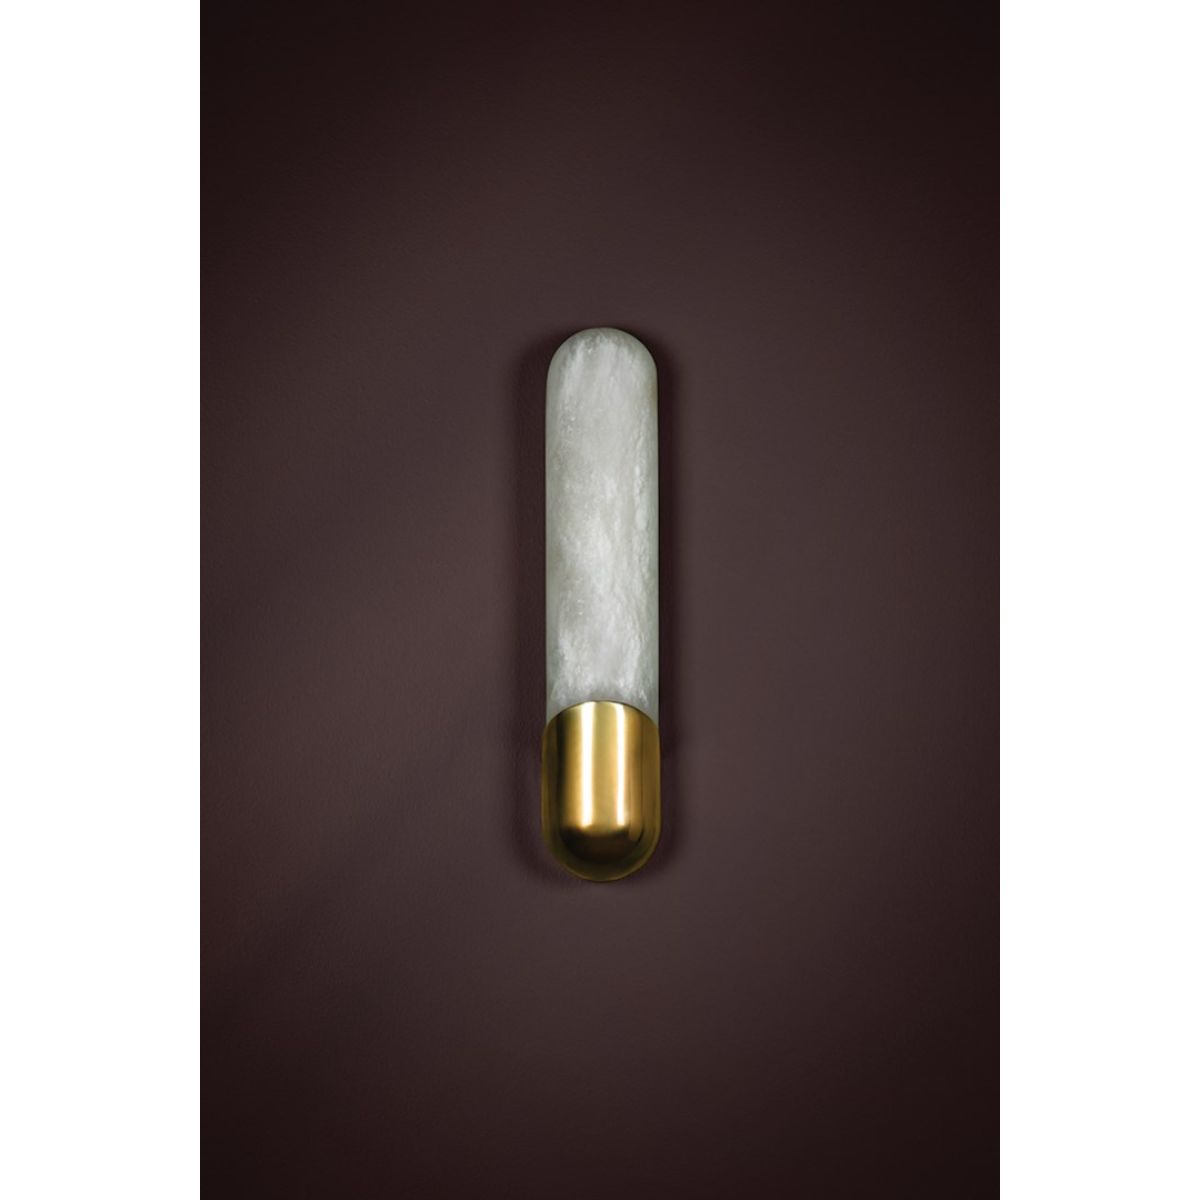 Rome 19 in. LED Wall Sconce vintage brass Finish